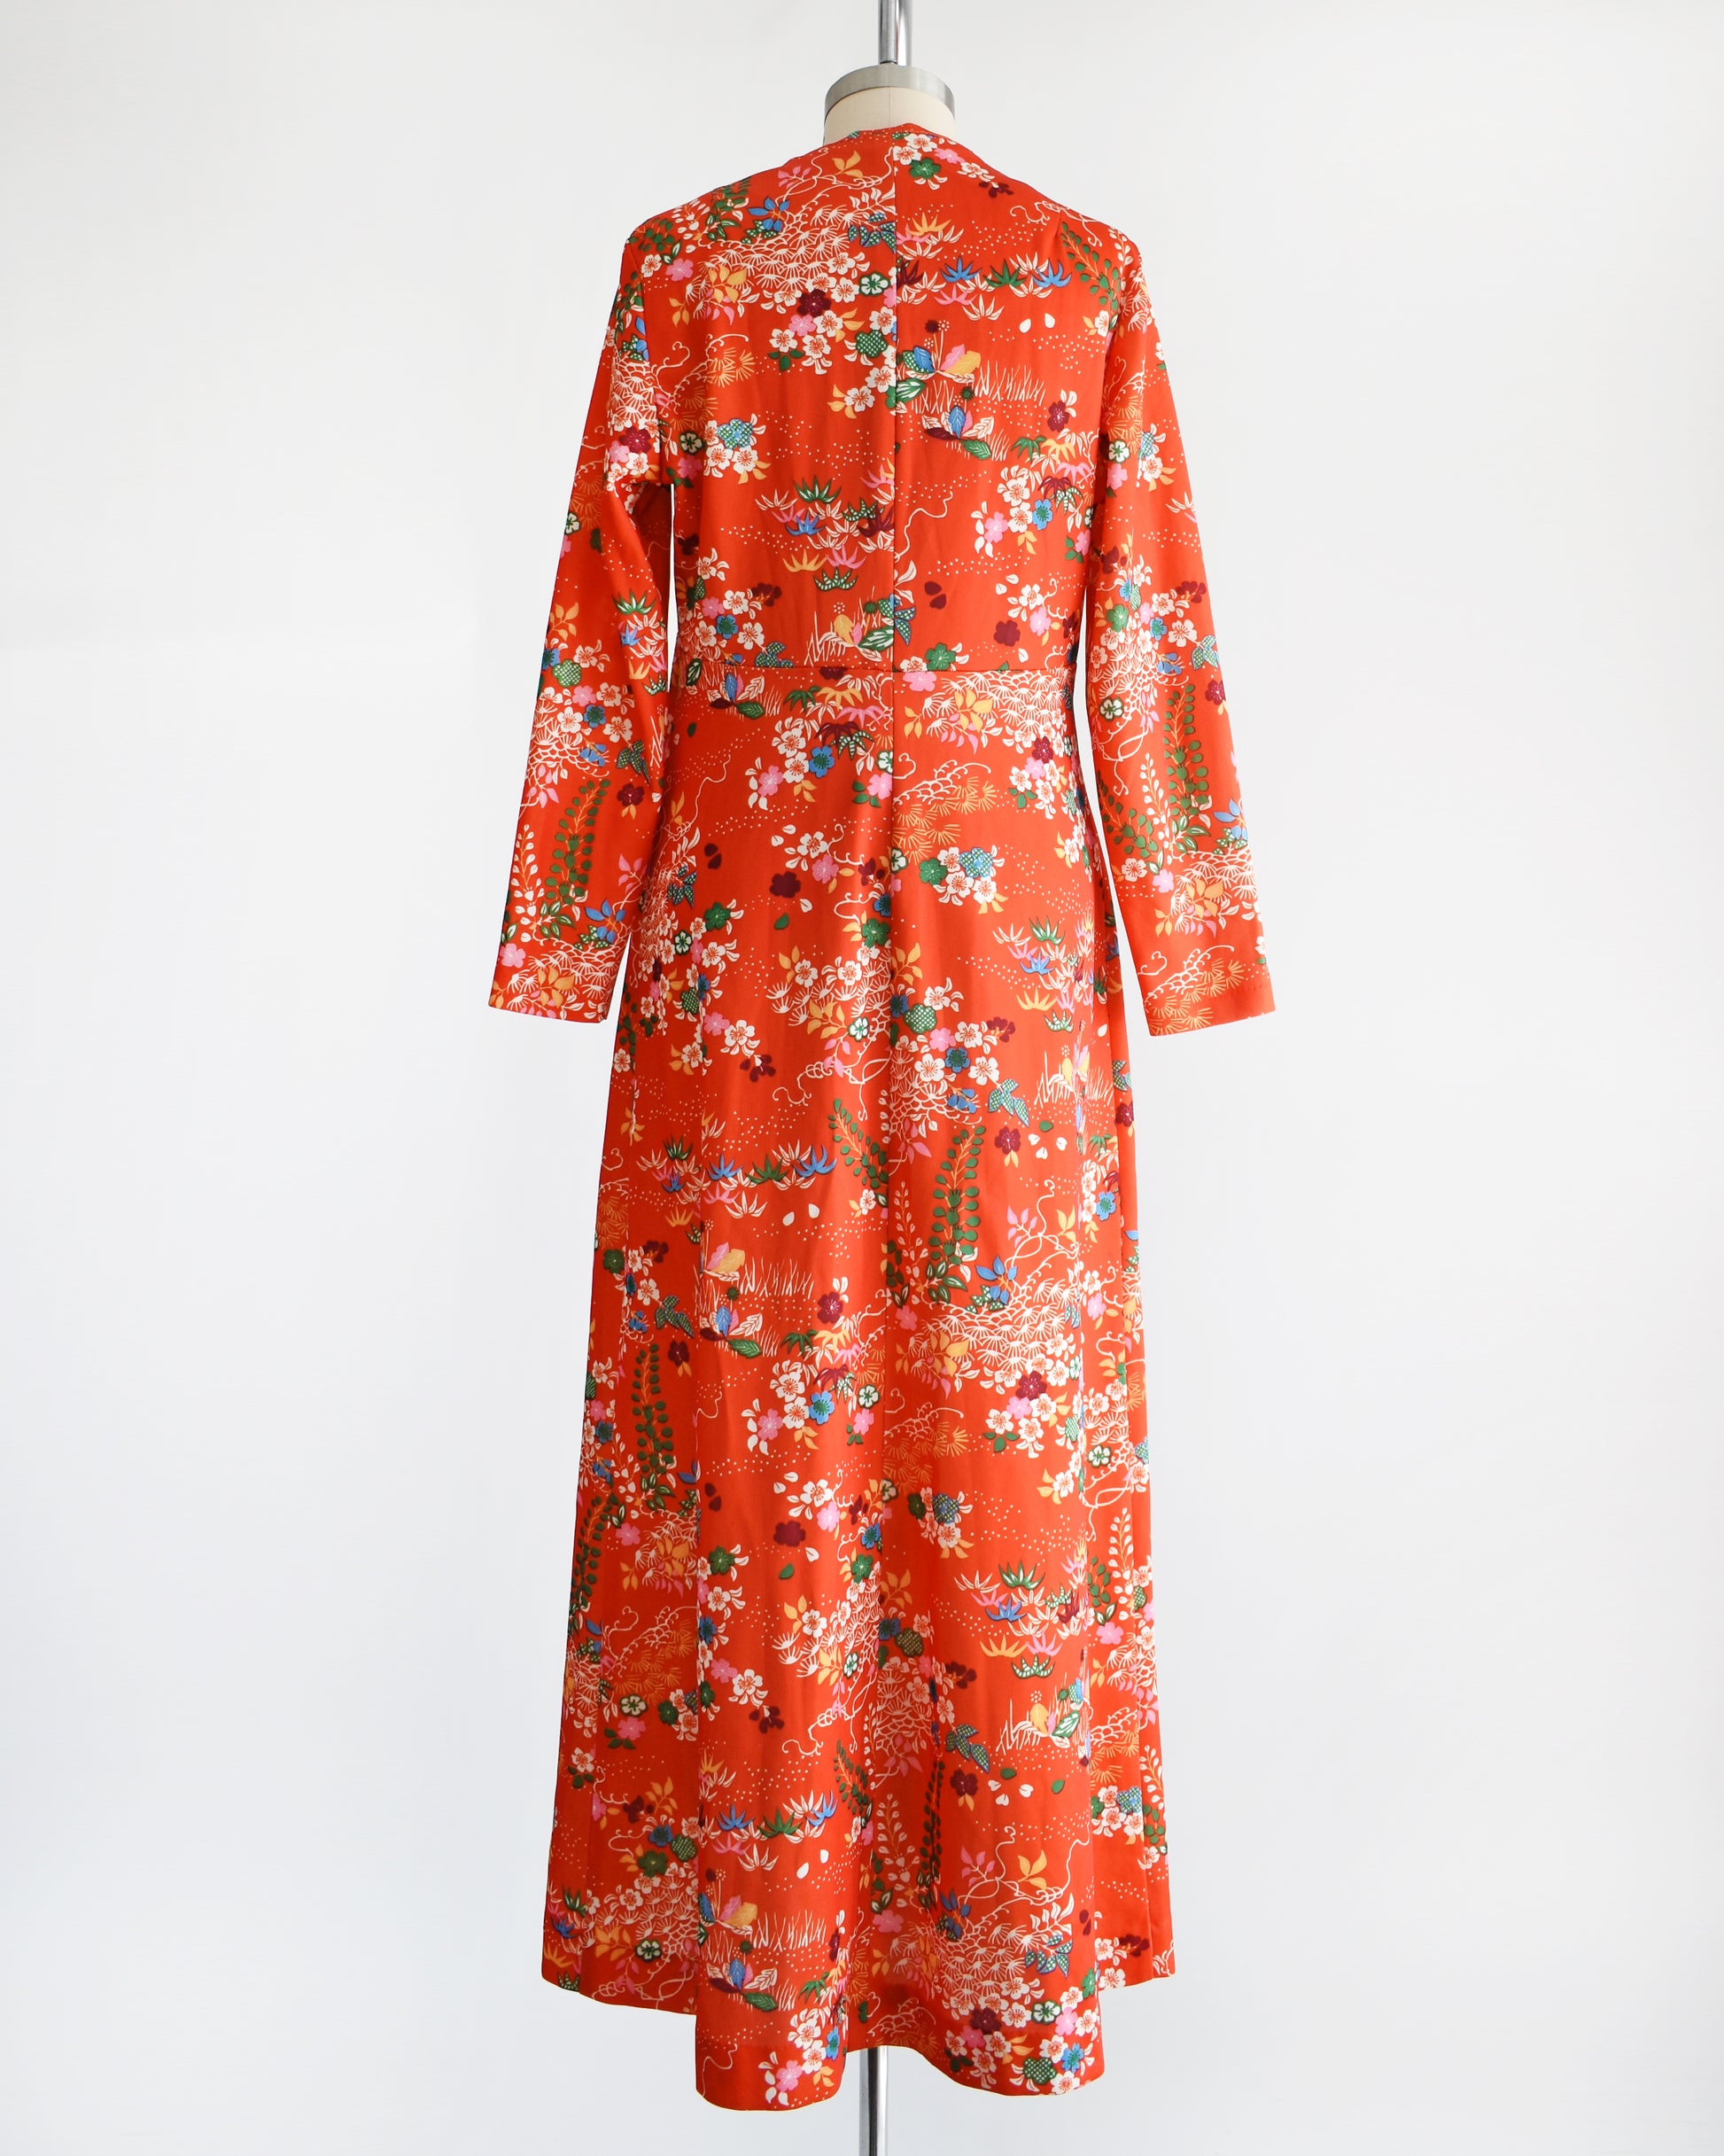 Back view of a vintage 1970s maxi dress features a vibrant red-orange hue, with a delightful floral and dotted print in homage to traditional Japanese flower designs. 